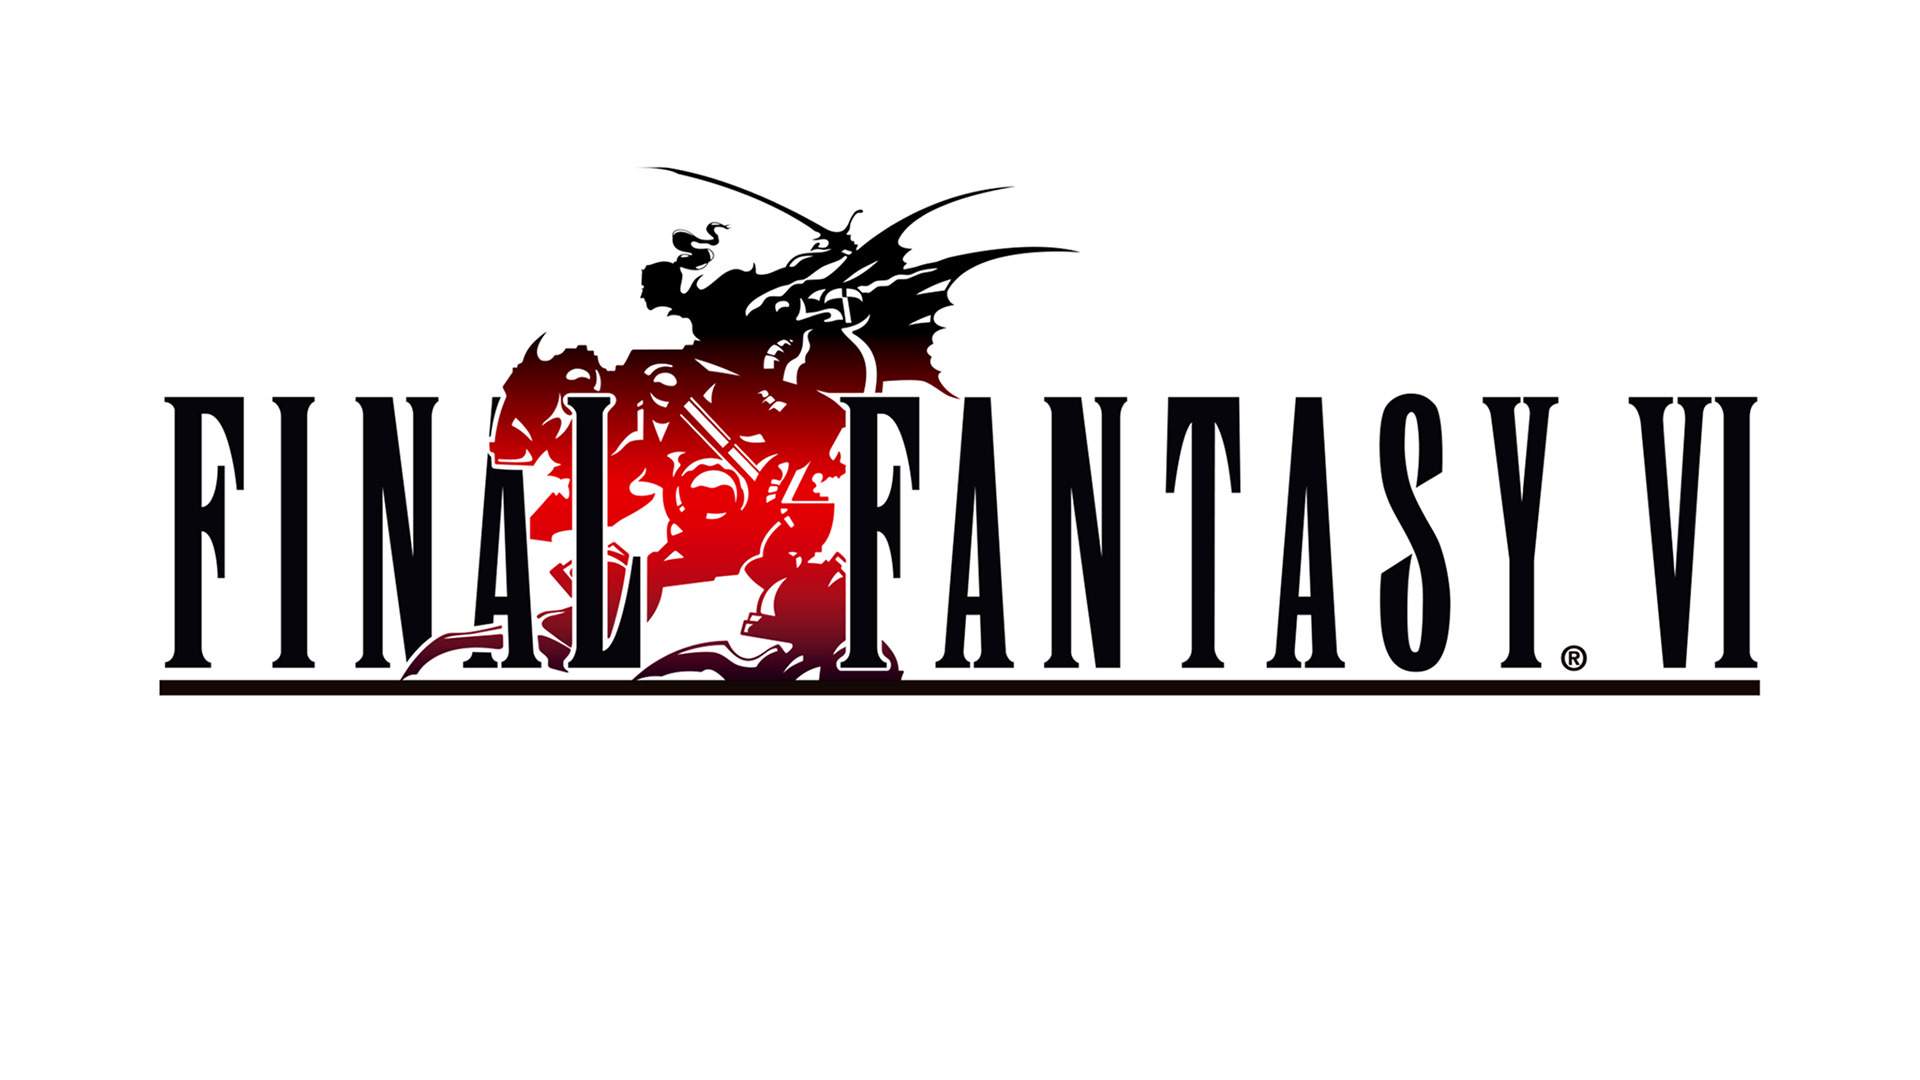 SQUARE ENIX | The Official SQUARE ENIX Website - FINAL FANTASY VI is now  available for pre-purchase!